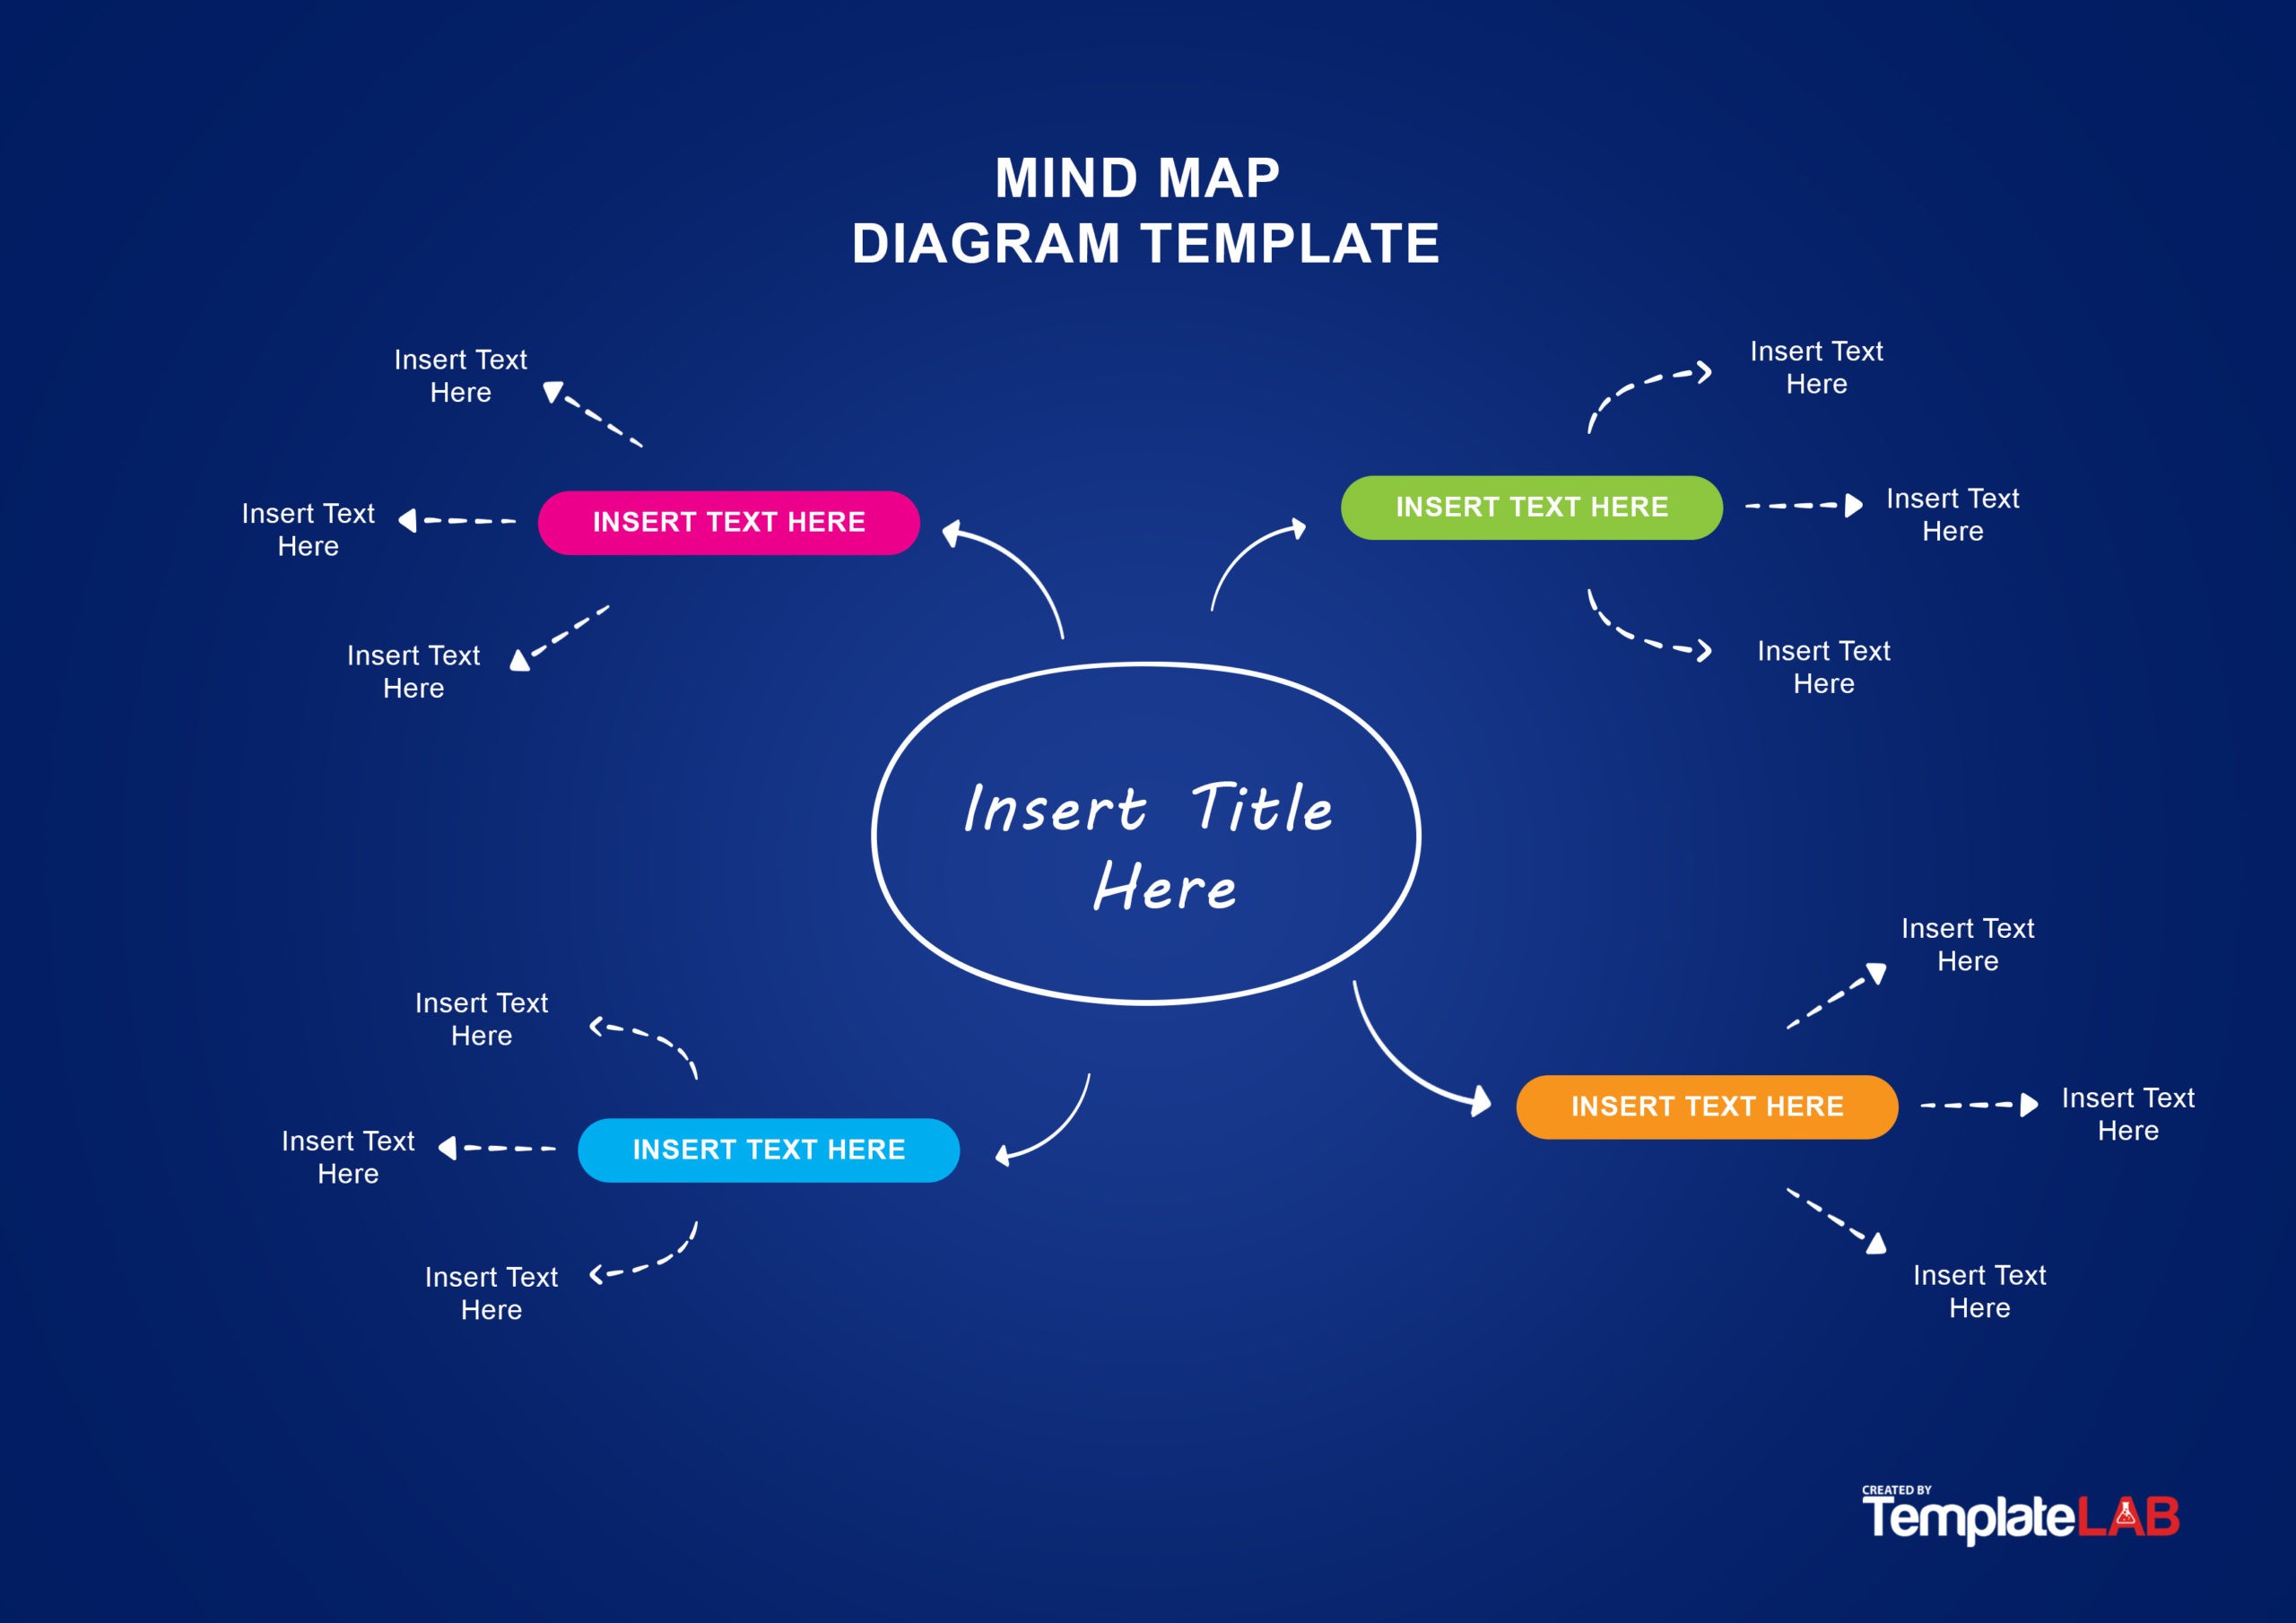 37-free-mind-map-templates-examples-word-powerpoint-psd